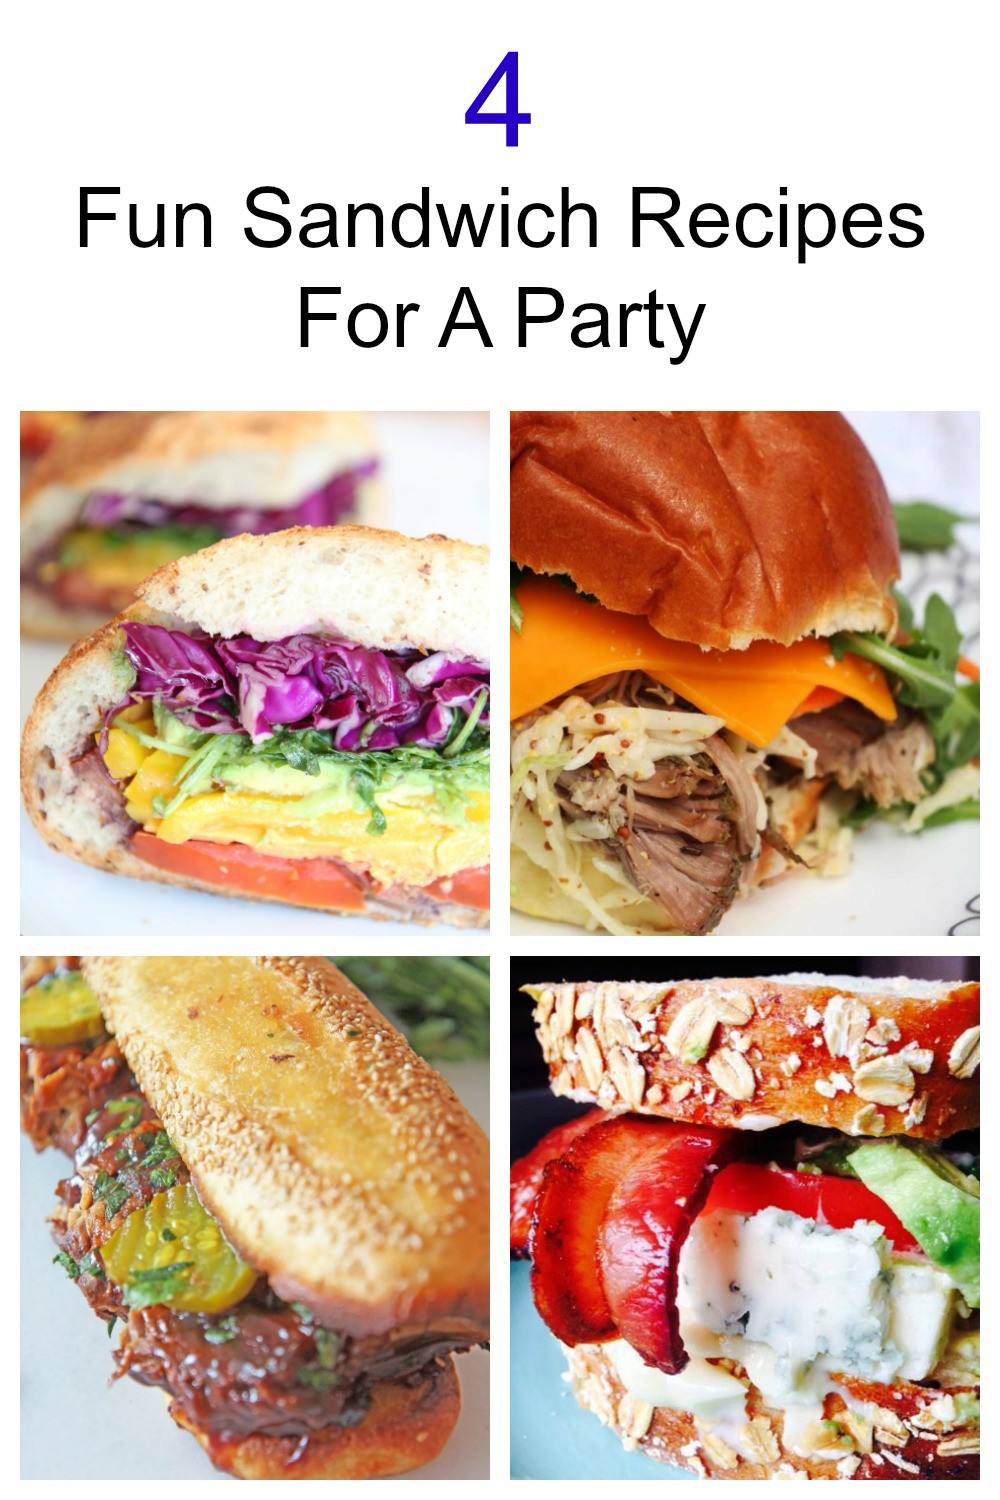 4 Fun Sandwich Recipes For A Party. No need to make tons of individual portions. These huge sandwiches feed a crowd. We have huge veggie sandwich, pulled pork sandwich in slow cooker, Blue cheese BLT sandwich, and BBQ pork rib sandwich on garlic bread. Happy carb eating. www.Chophappy.com #sandwichrecipe #partyideas